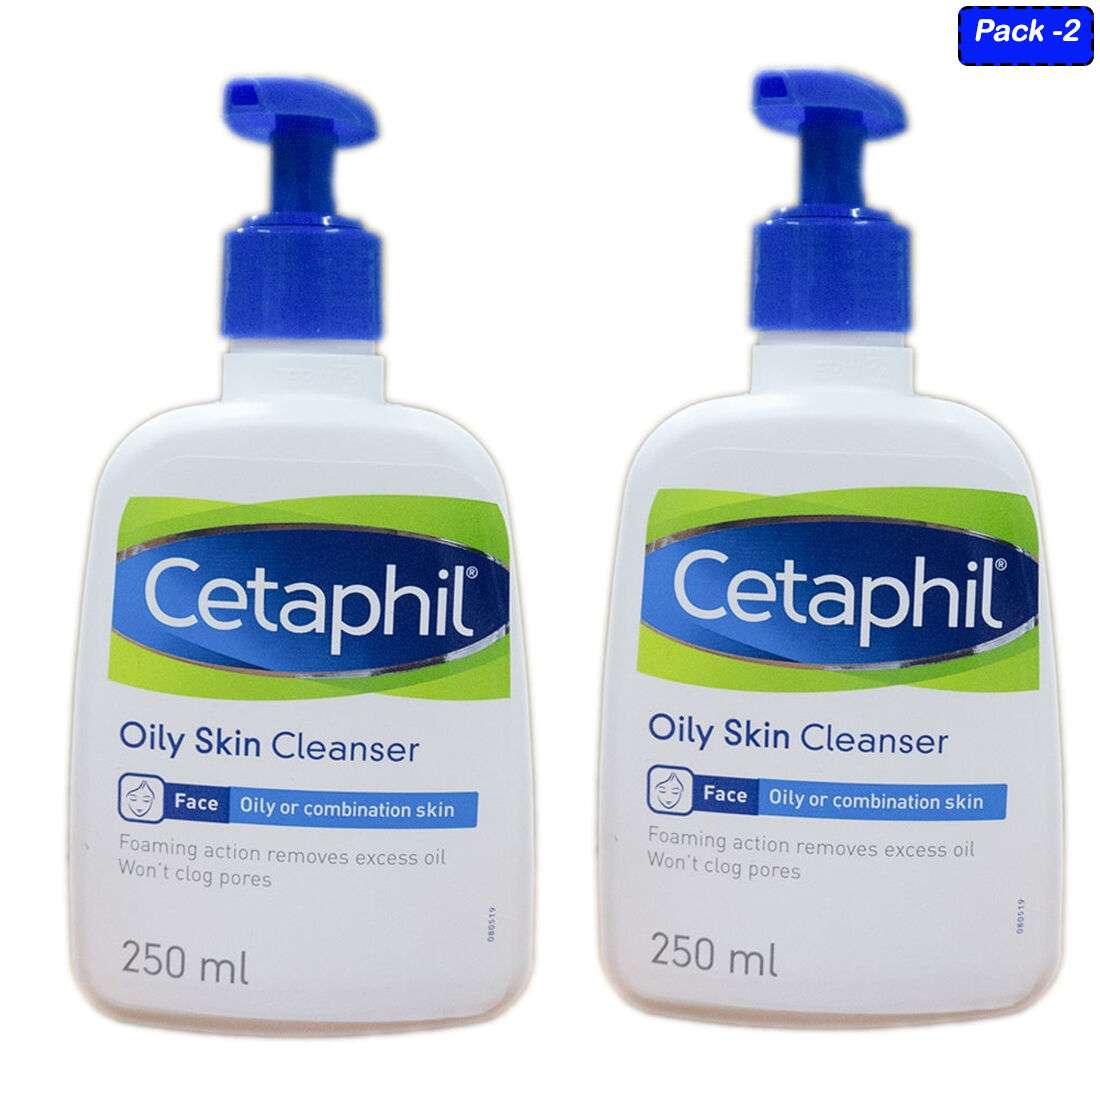 Cetaphil Oily Skin Cleanser (Pack of 2)